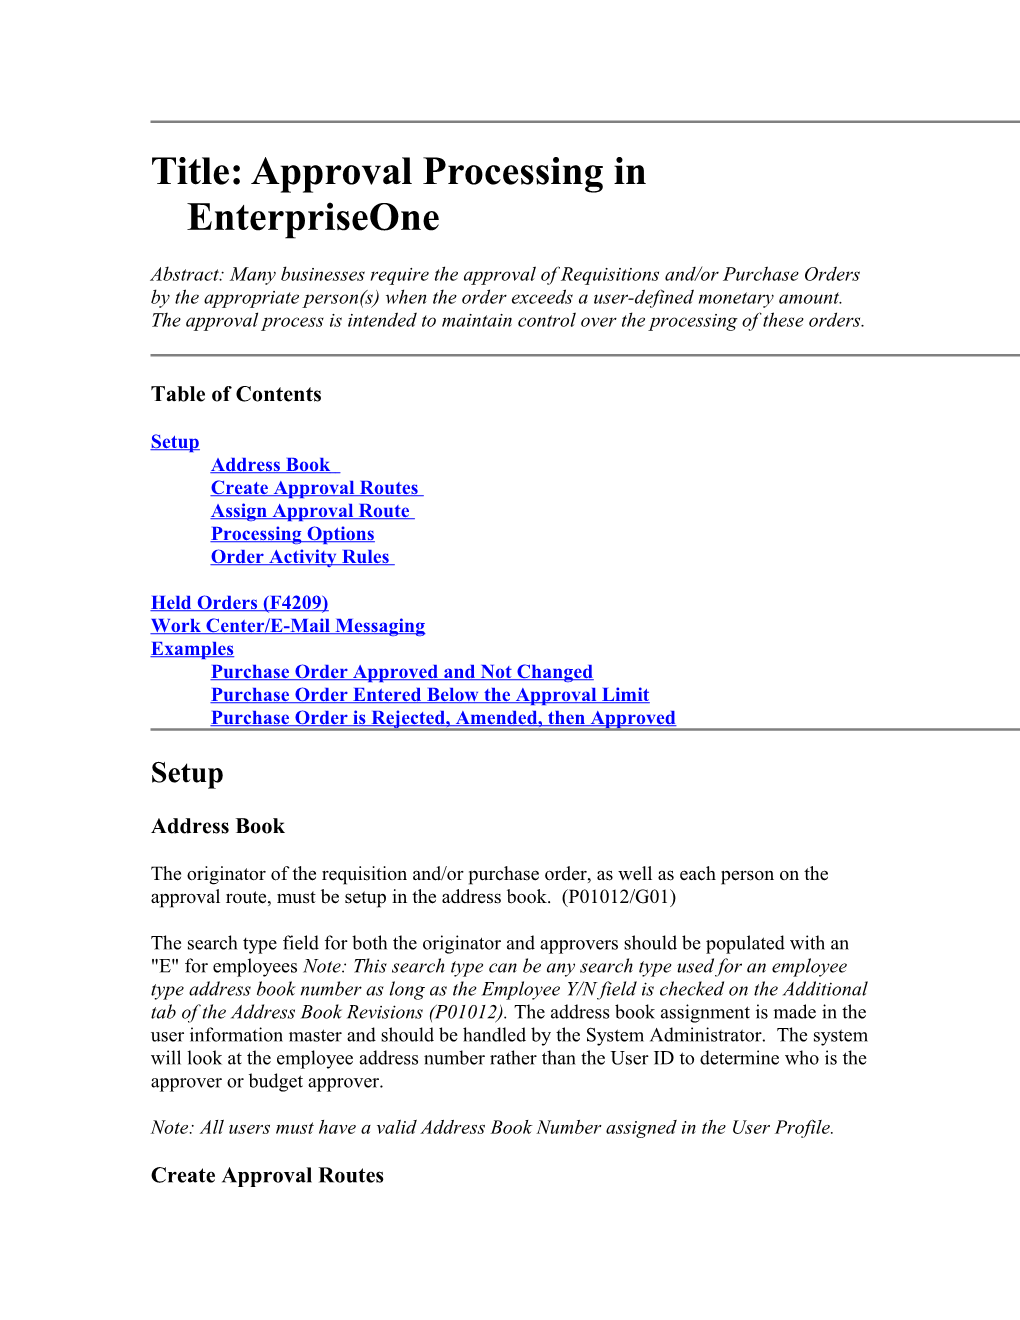 Title: Approval Processing in Enterpriseone